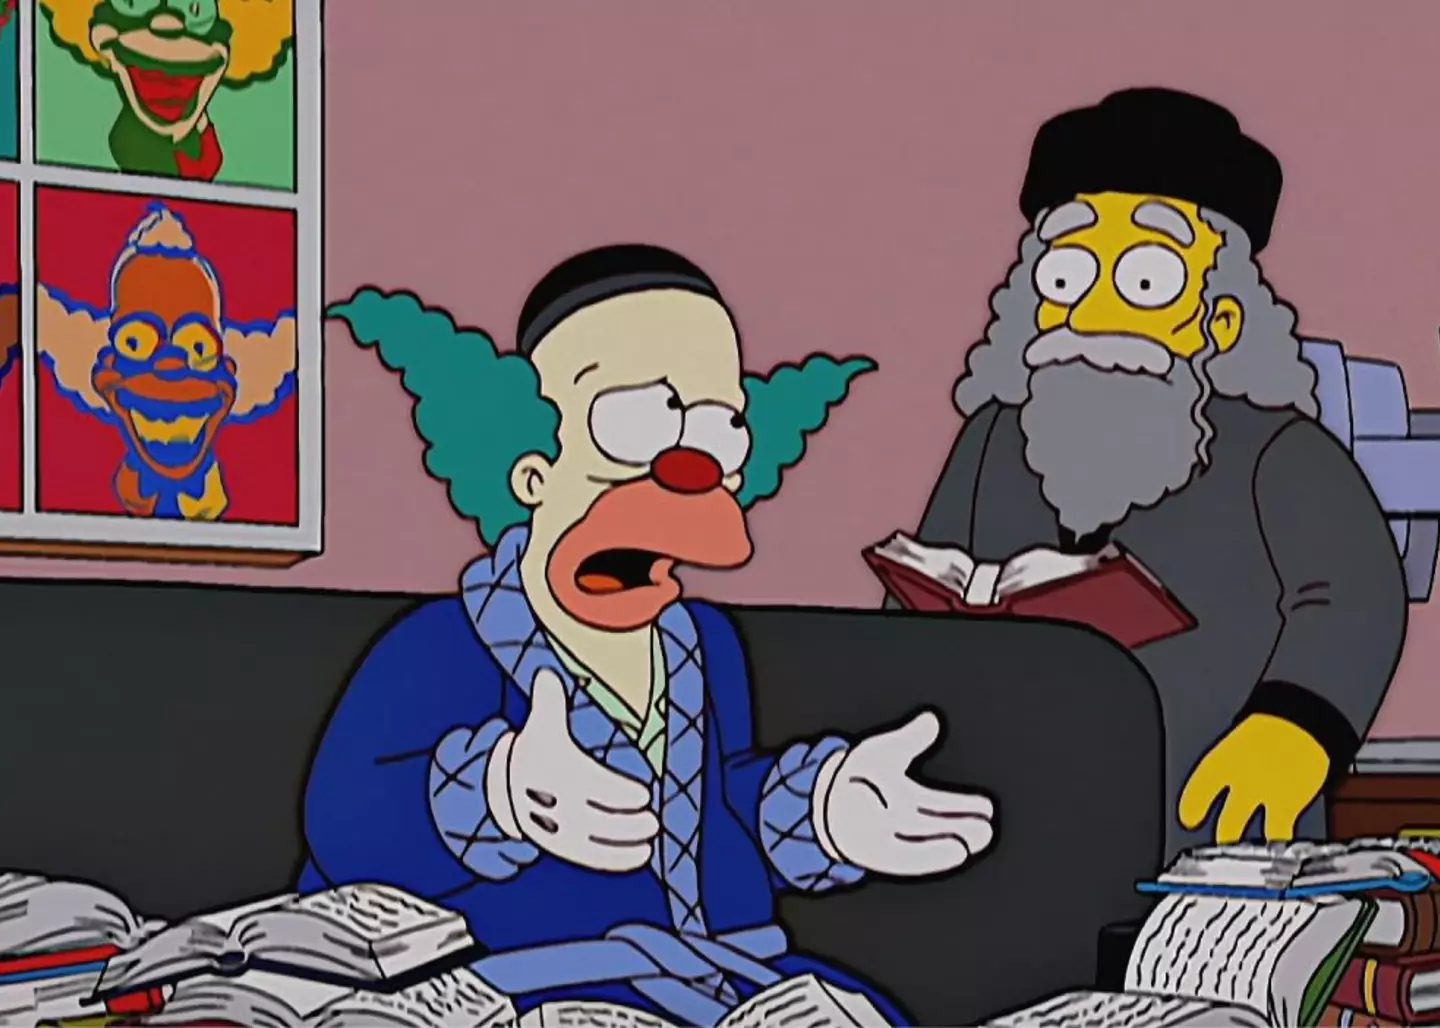 Rabbi Hyman Krustofsky died unexpectedly during a conversation with his son Krusty. (Disney)